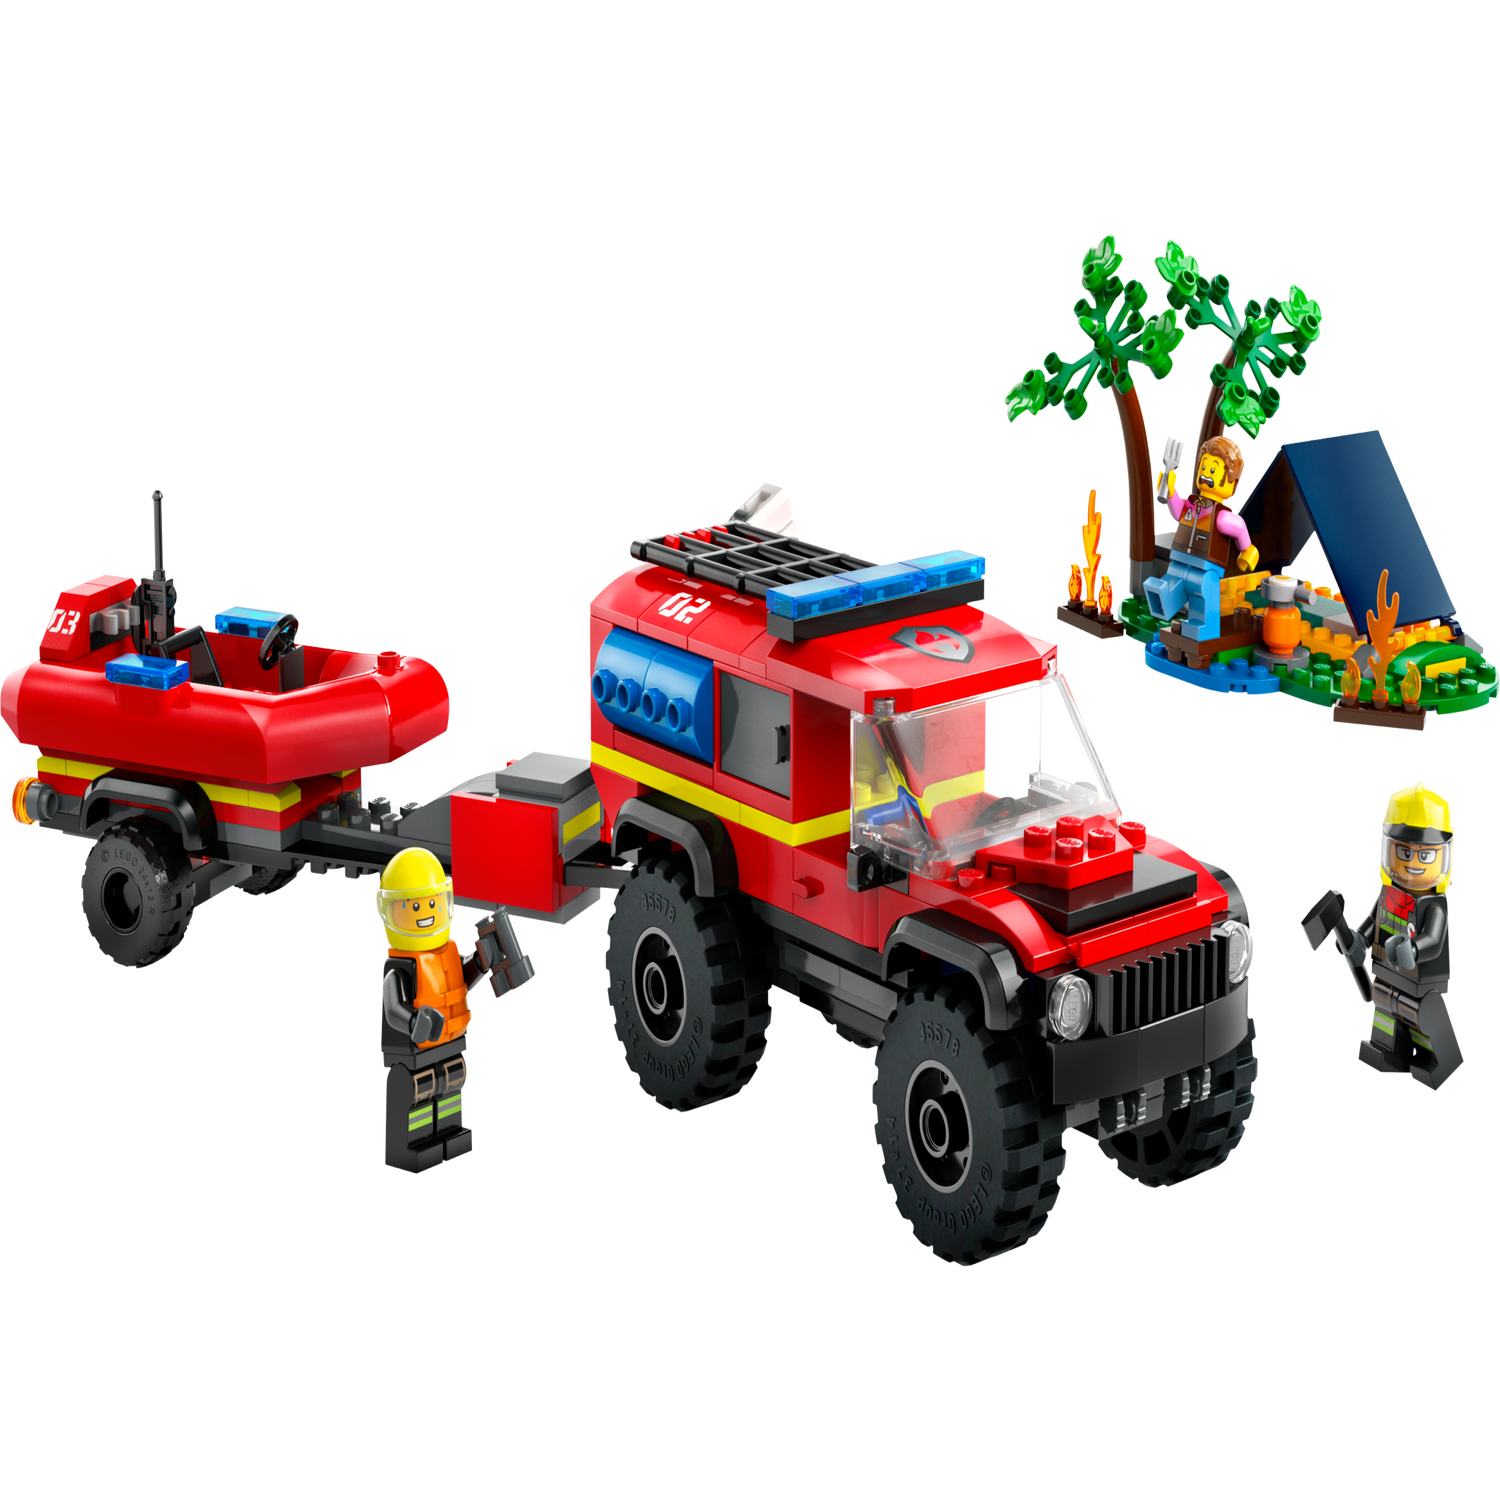 4x4 Fire Truck with Rescue Boat 60412, City